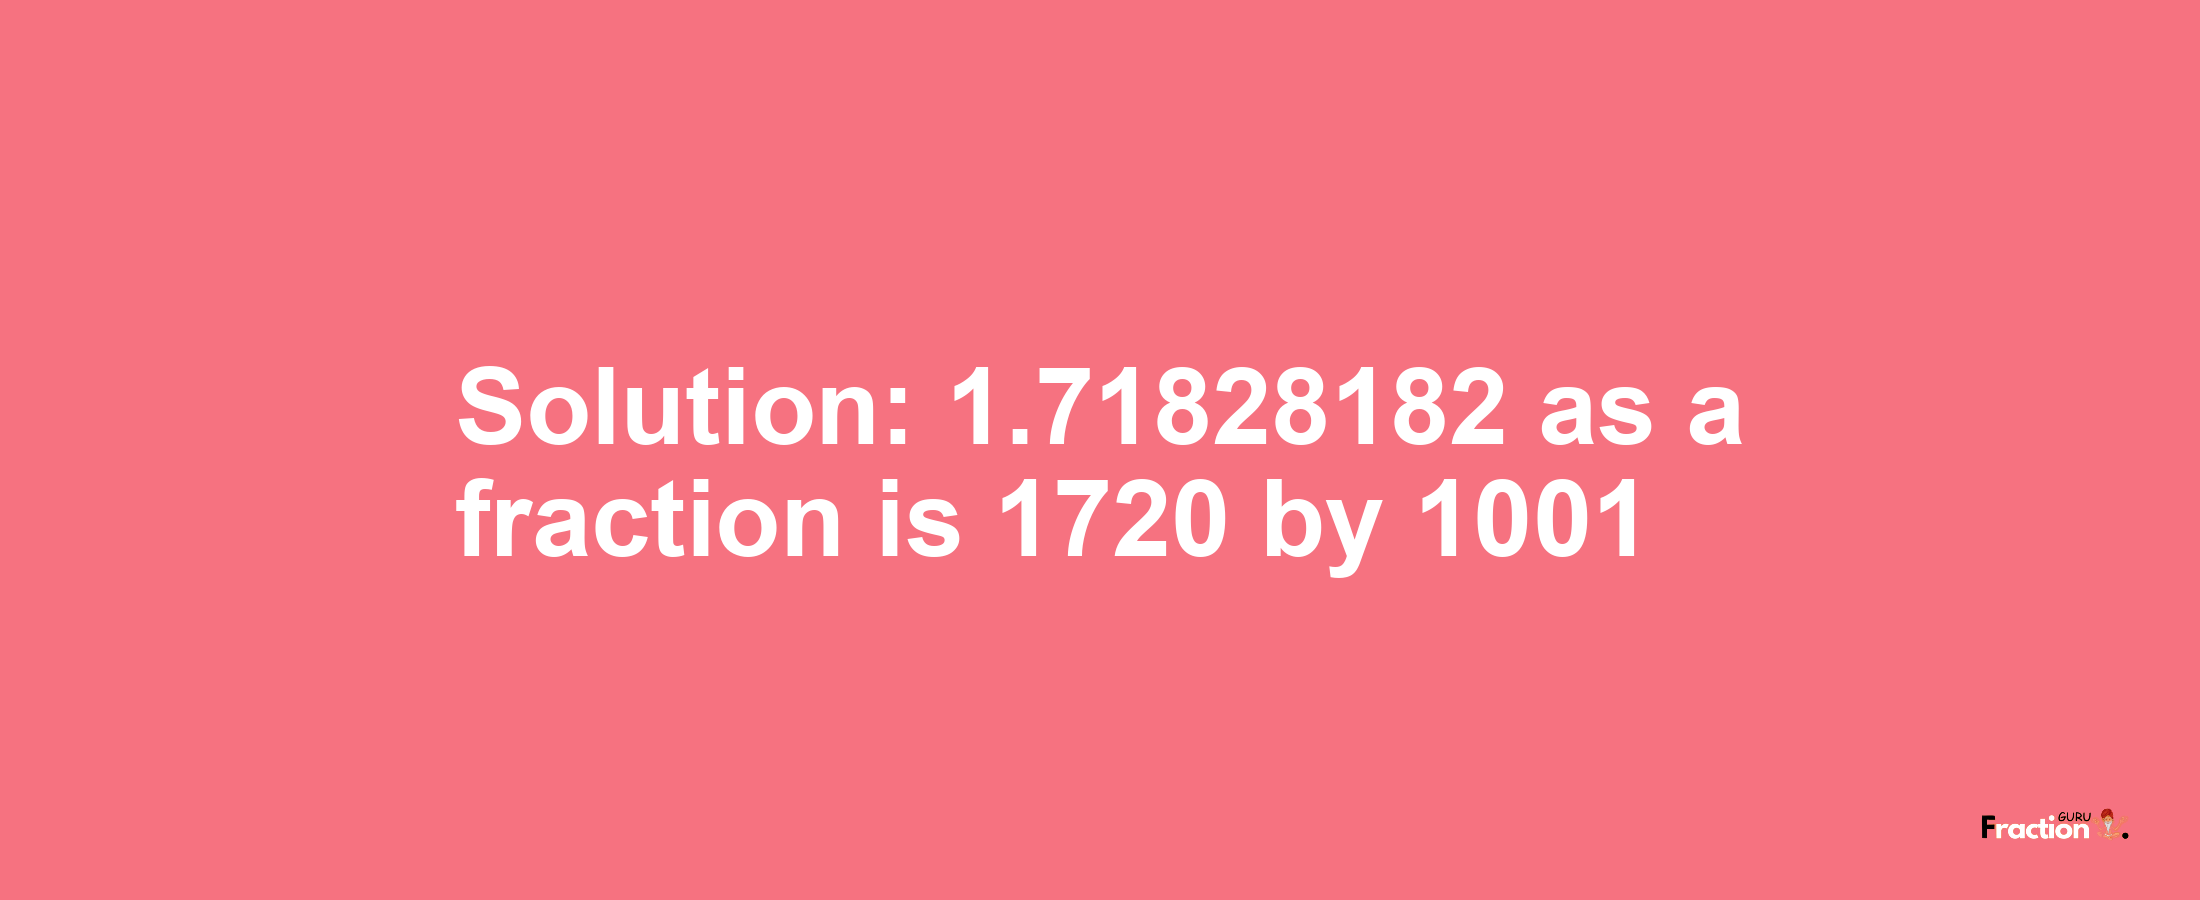 Solution:1.71828182 as a fraction is 1720/1001